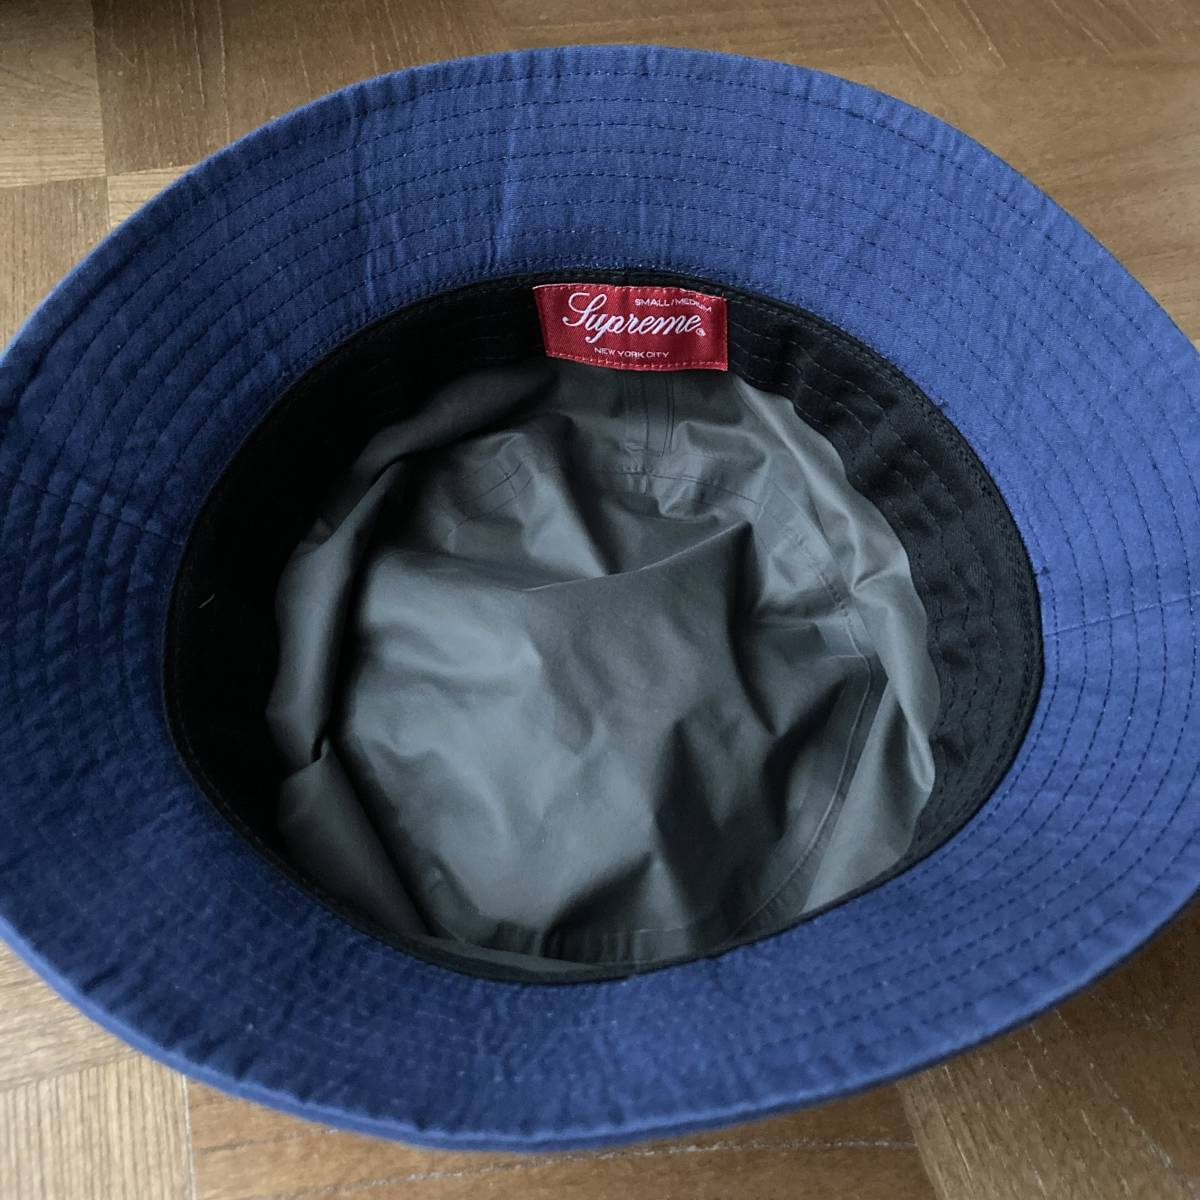 Supreme 2020 FW GORE-TEX Crusher hats s/m｜PayPayフリマ